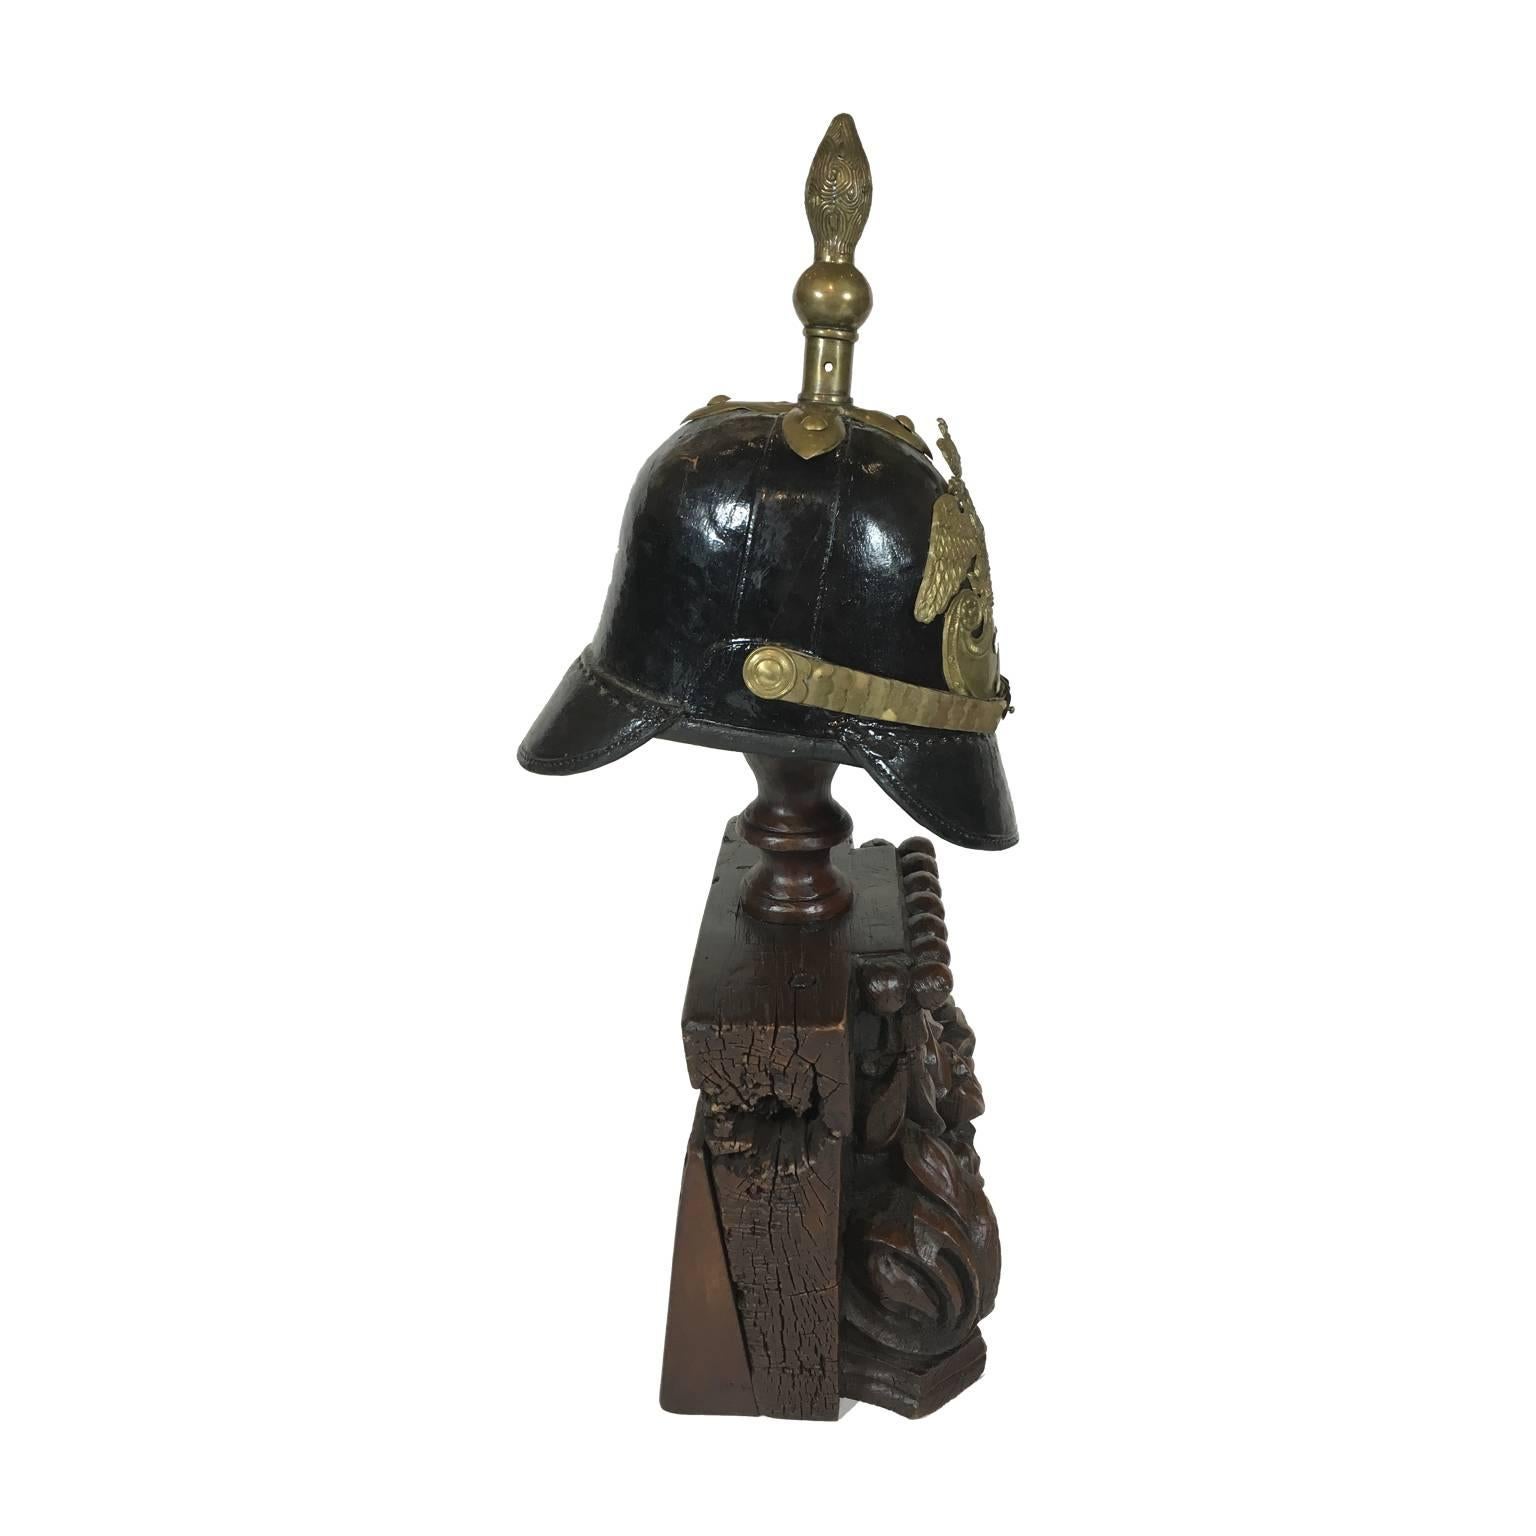 This is a 19th century Imperial Russian Officer's Pickelhaube (Spiked Helmet) on an antique Bulgarian stand. The base is a vintage hand-carved Bulgarian column capital. Part of an extensive collection of pickelhaube officer's helmets from Imperial